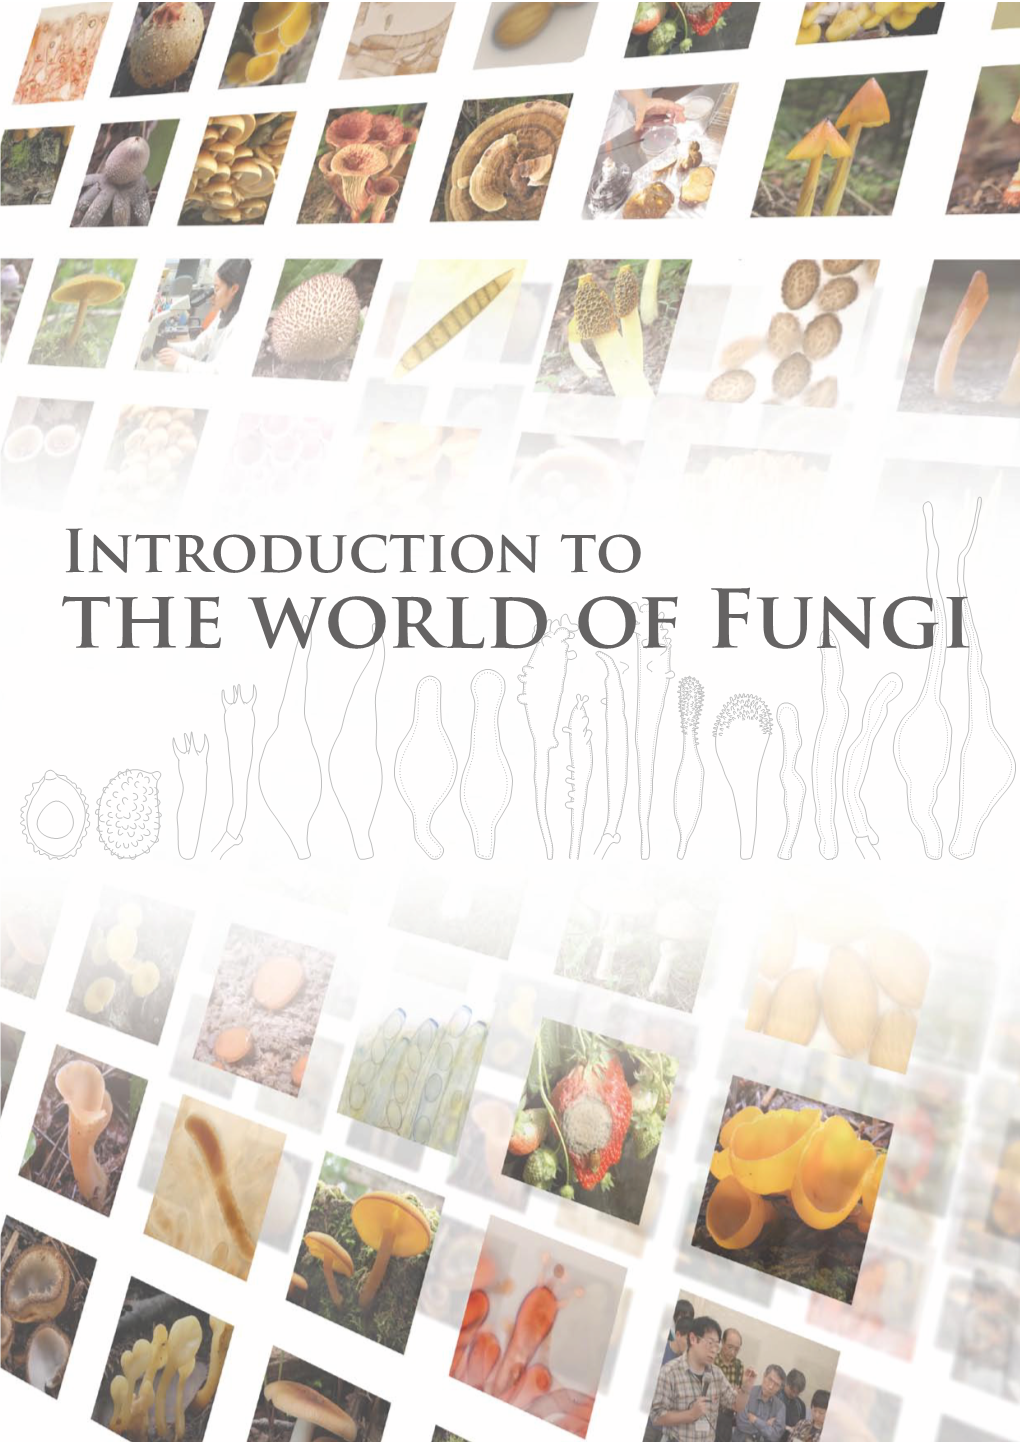 Intoroduction to the World of Fungi